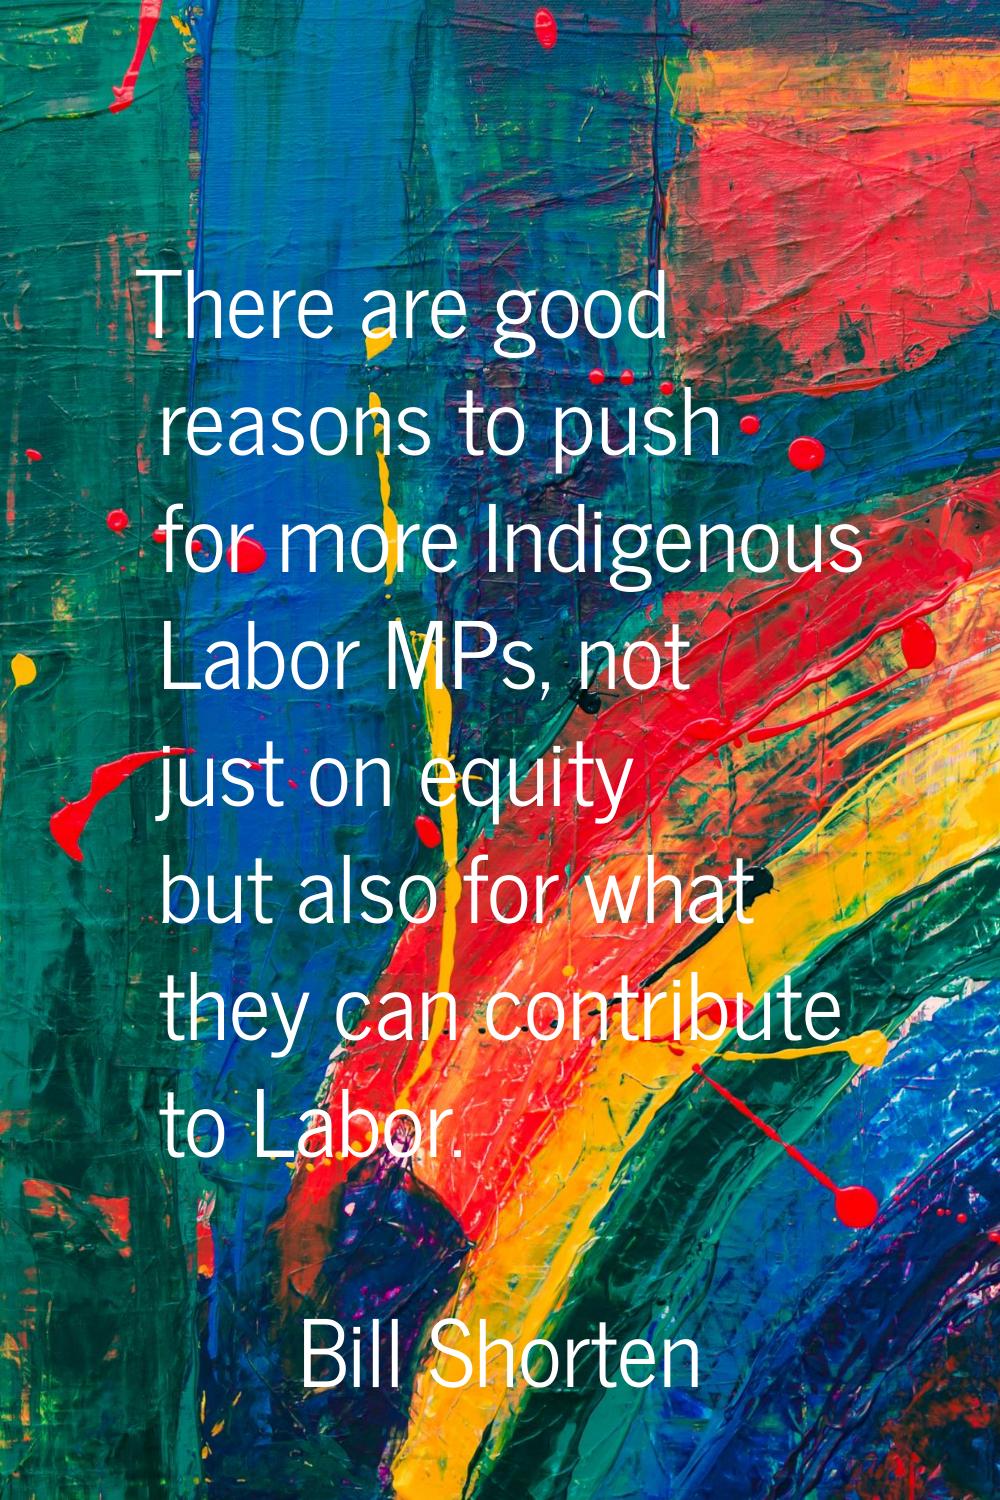 There are good reasons to push for more Indigenous Labor MPs, not just on equity but also for what 